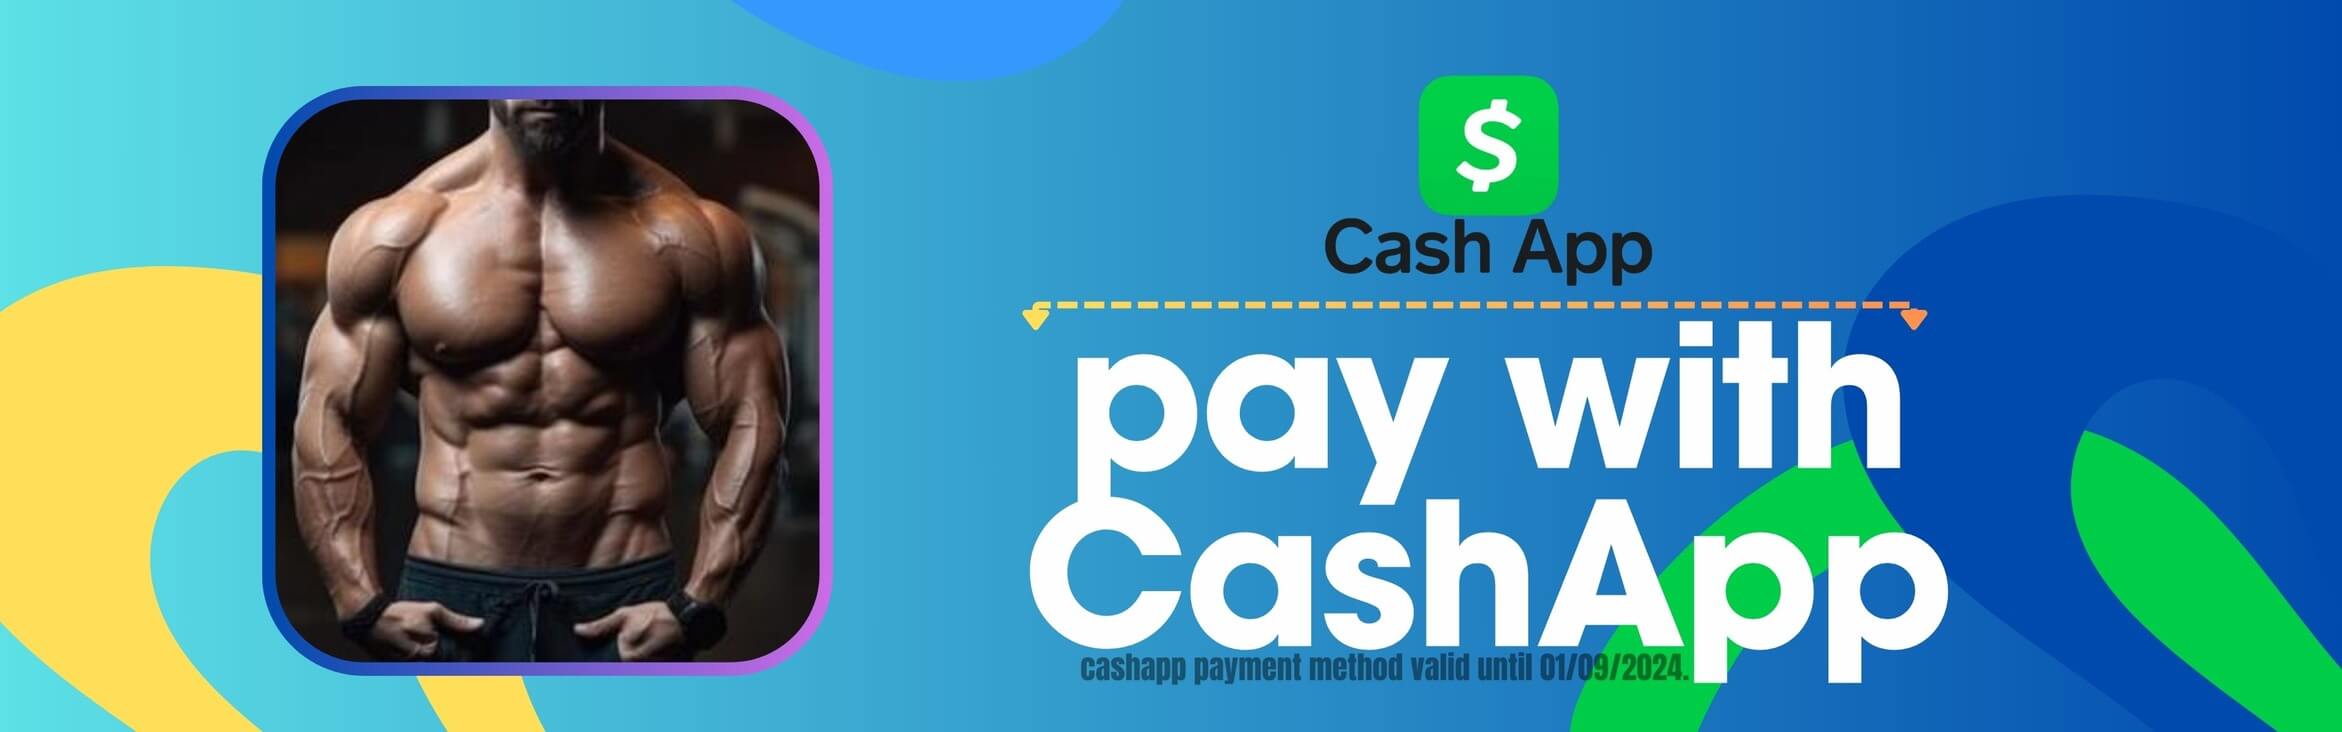 pay with cash app